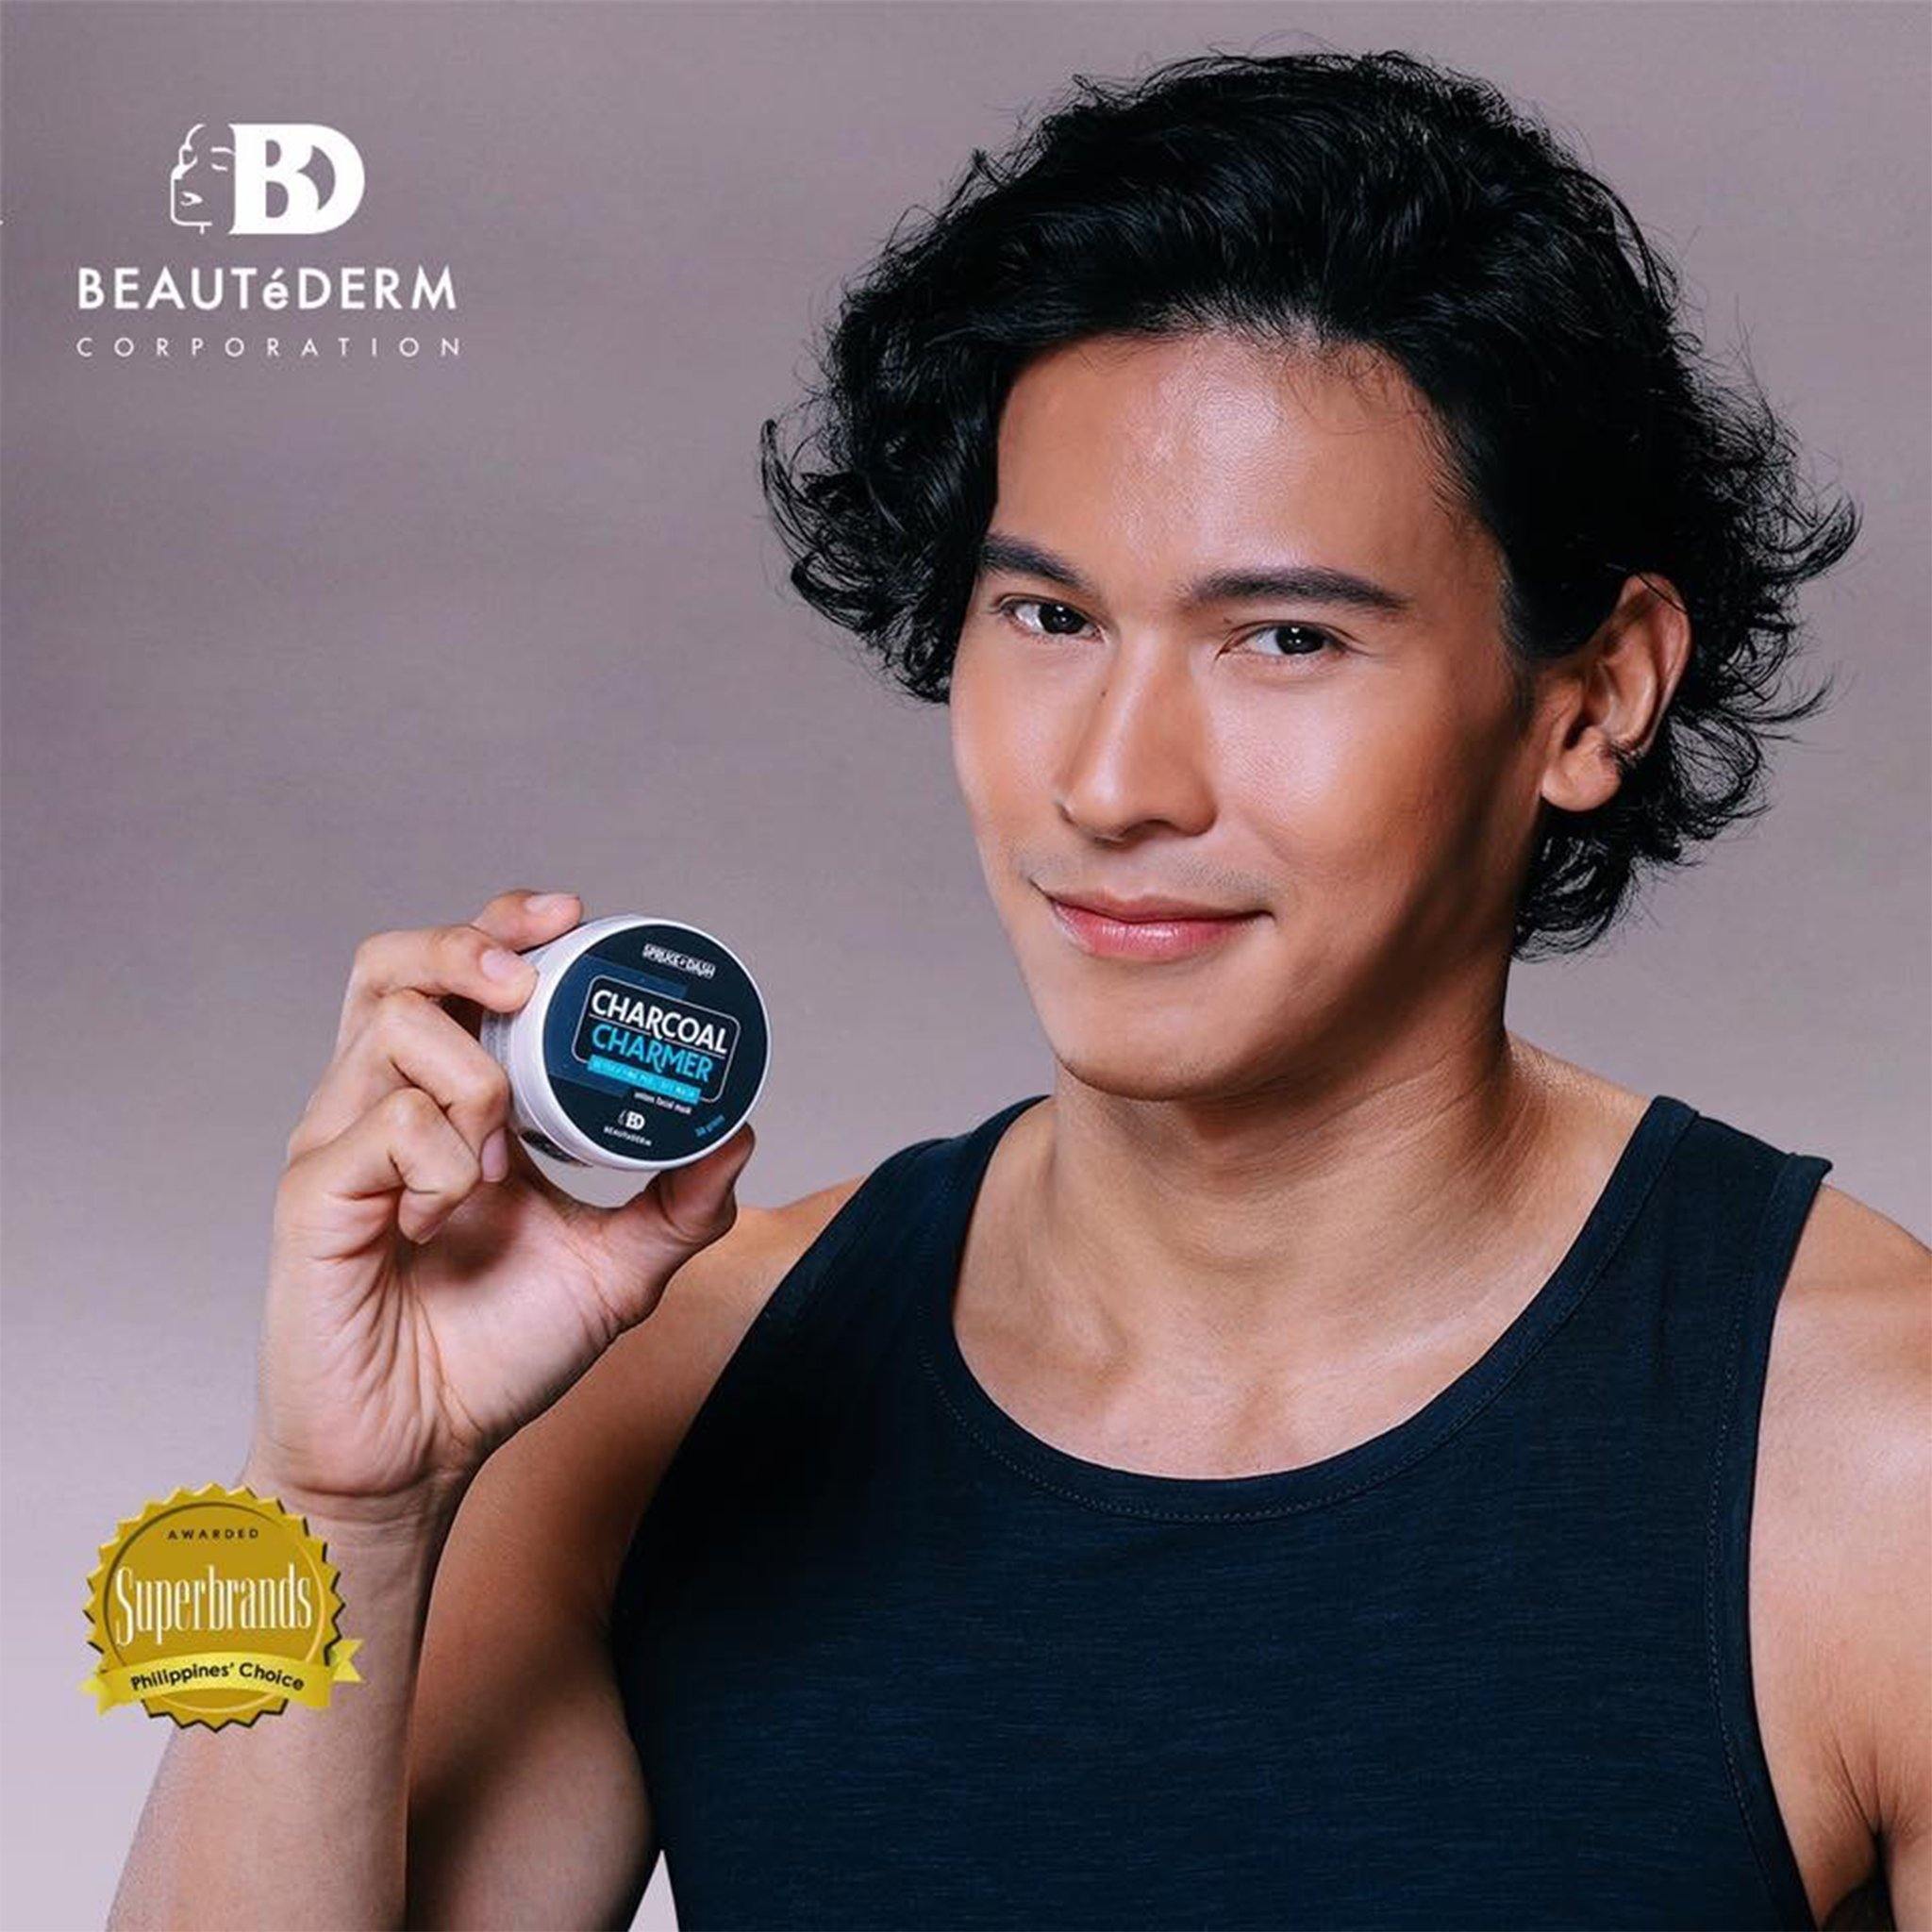 Charcoal Charmer Detoxifying Peel-off Mask, 50g, Spruce & Dash by Beautederm, with Enchong Dee (Beautederm Ambassador)